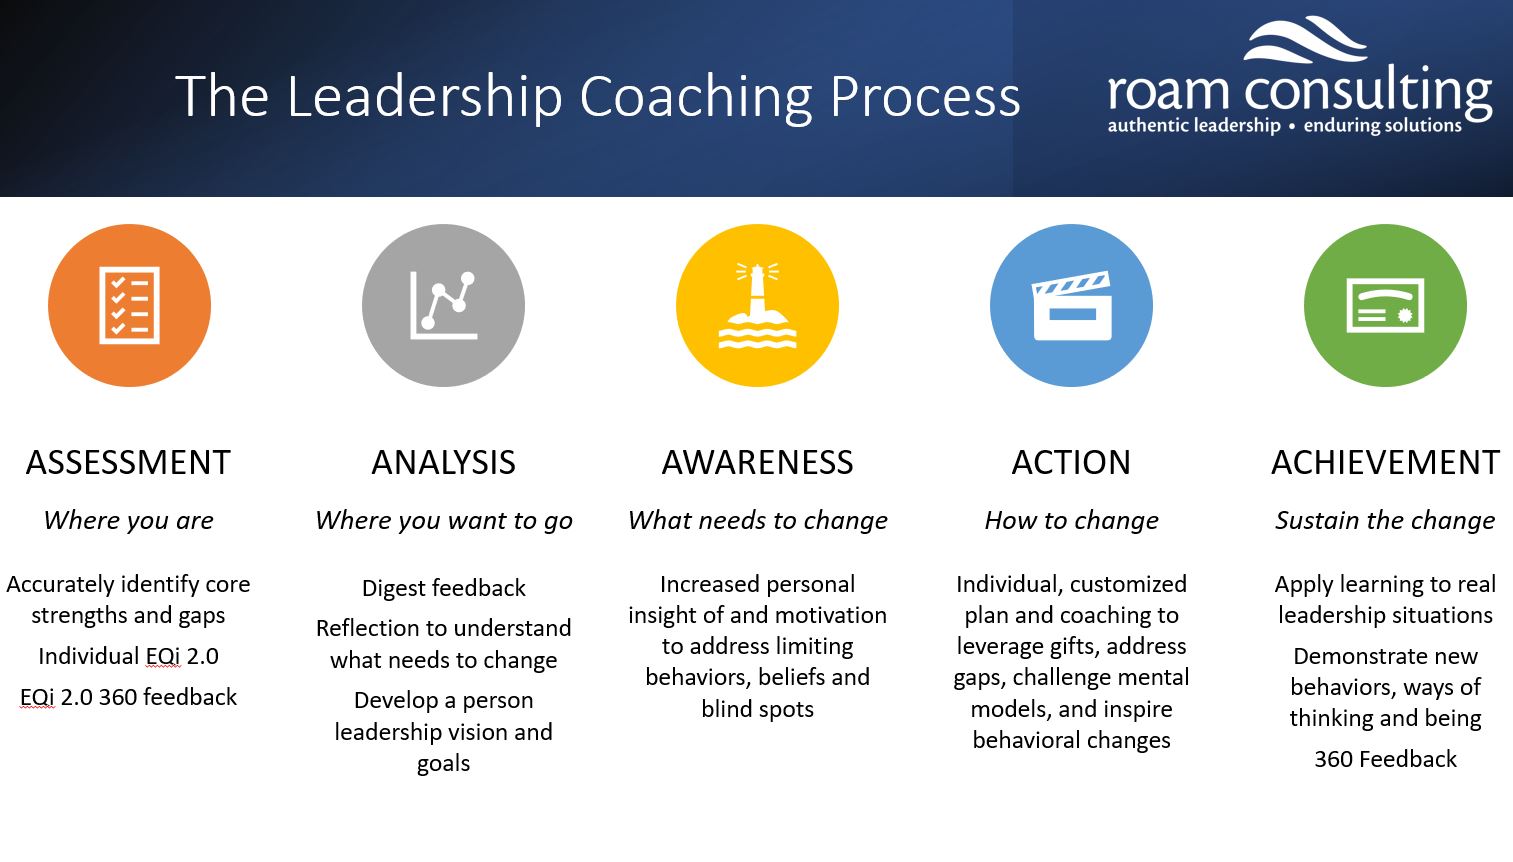 The leadership coaching process helps to get the most out of coaching sessions